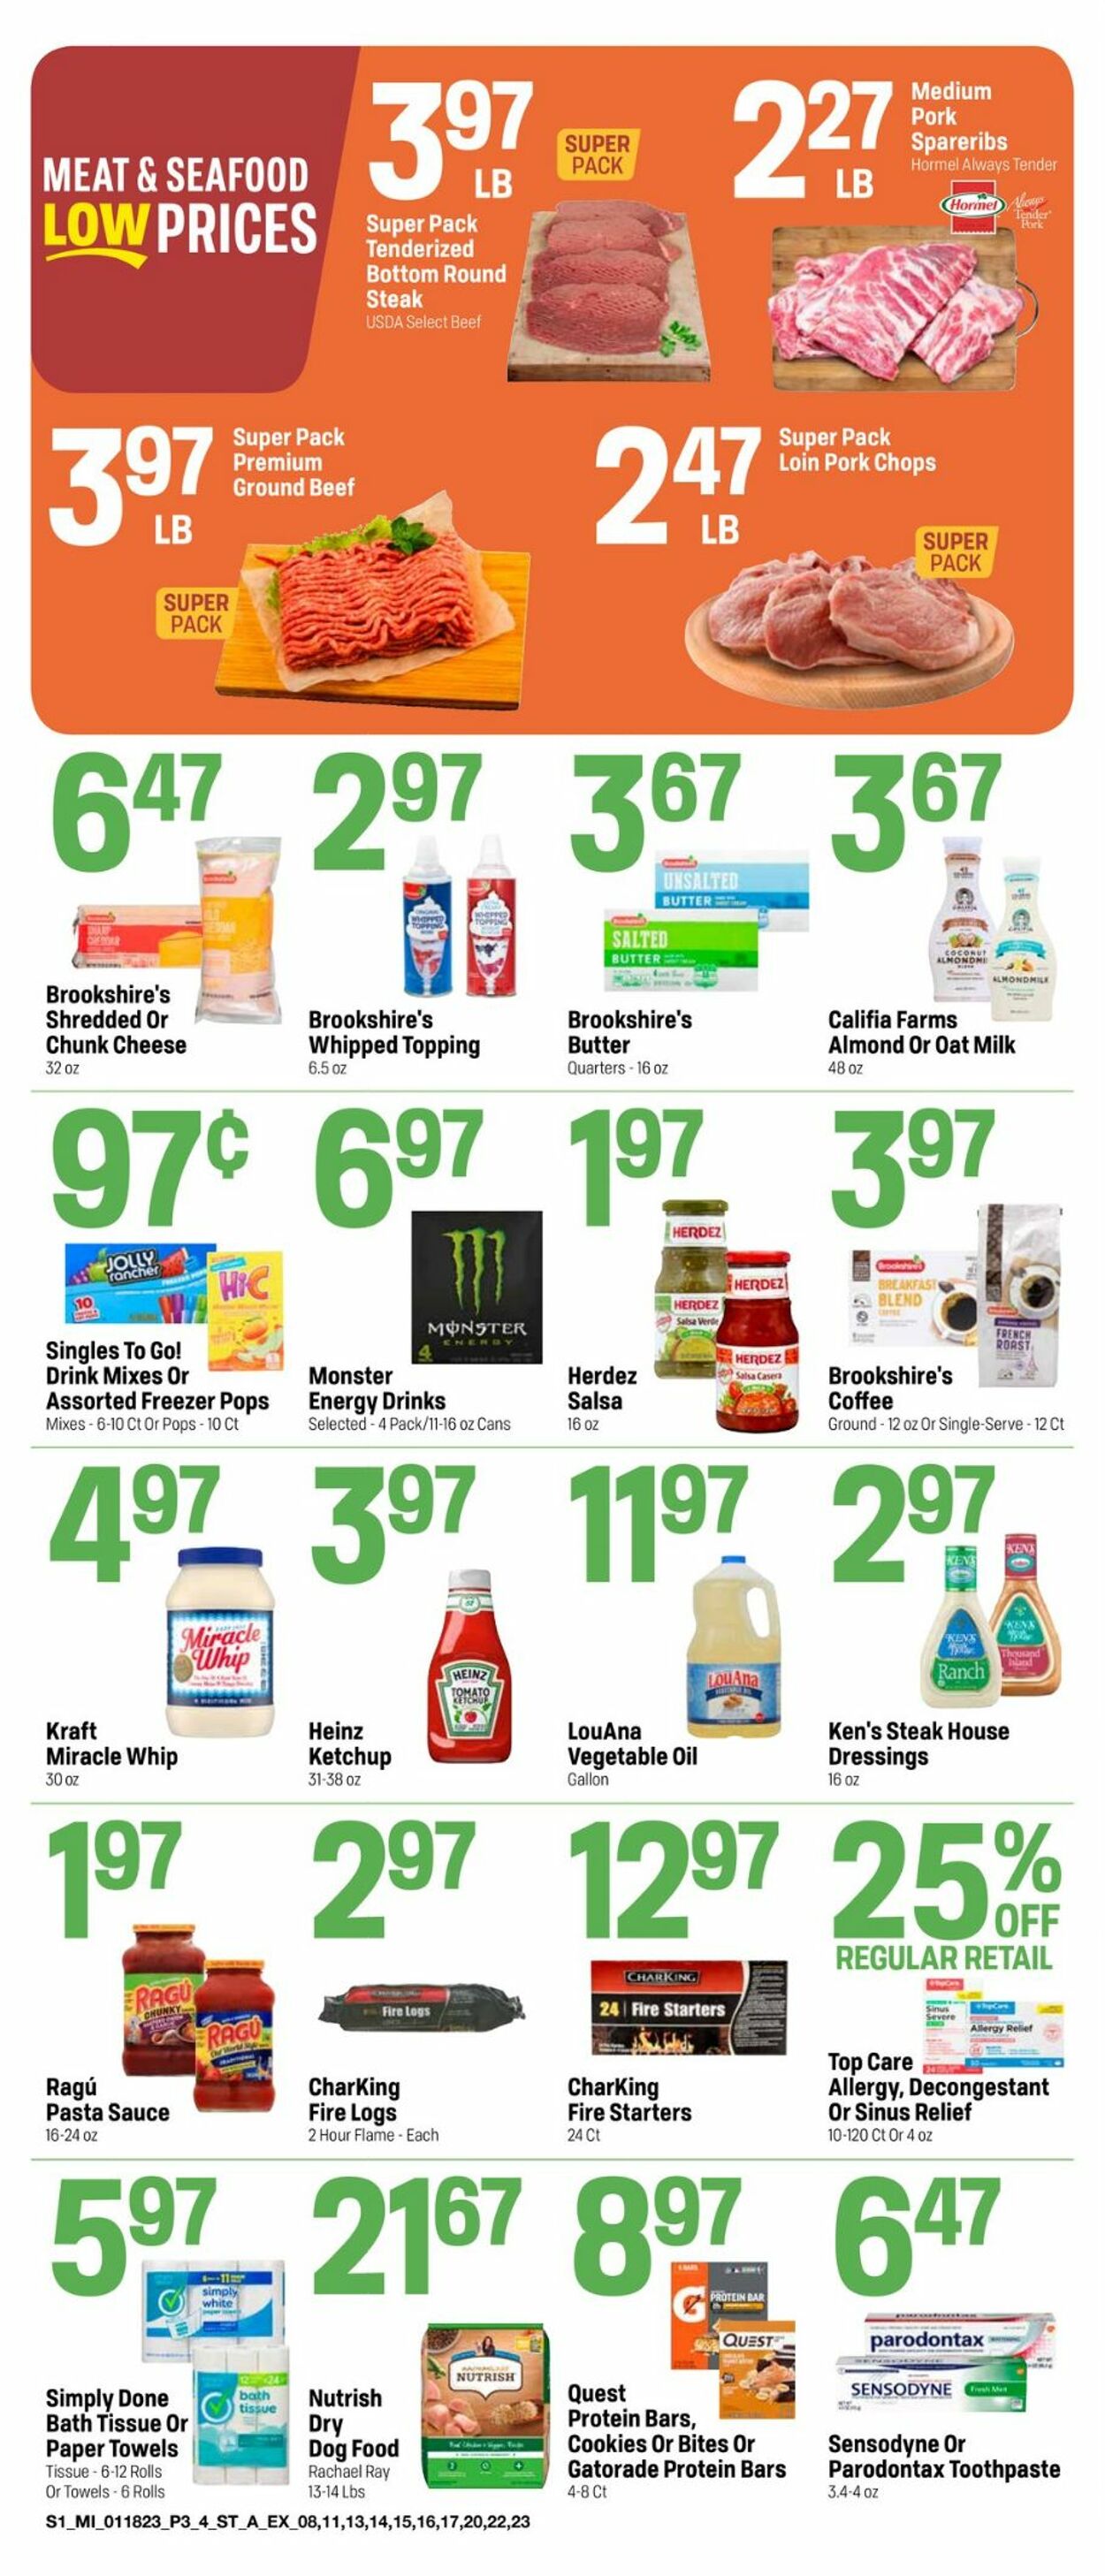 Super 1 Foods Ad from 01/18/2023